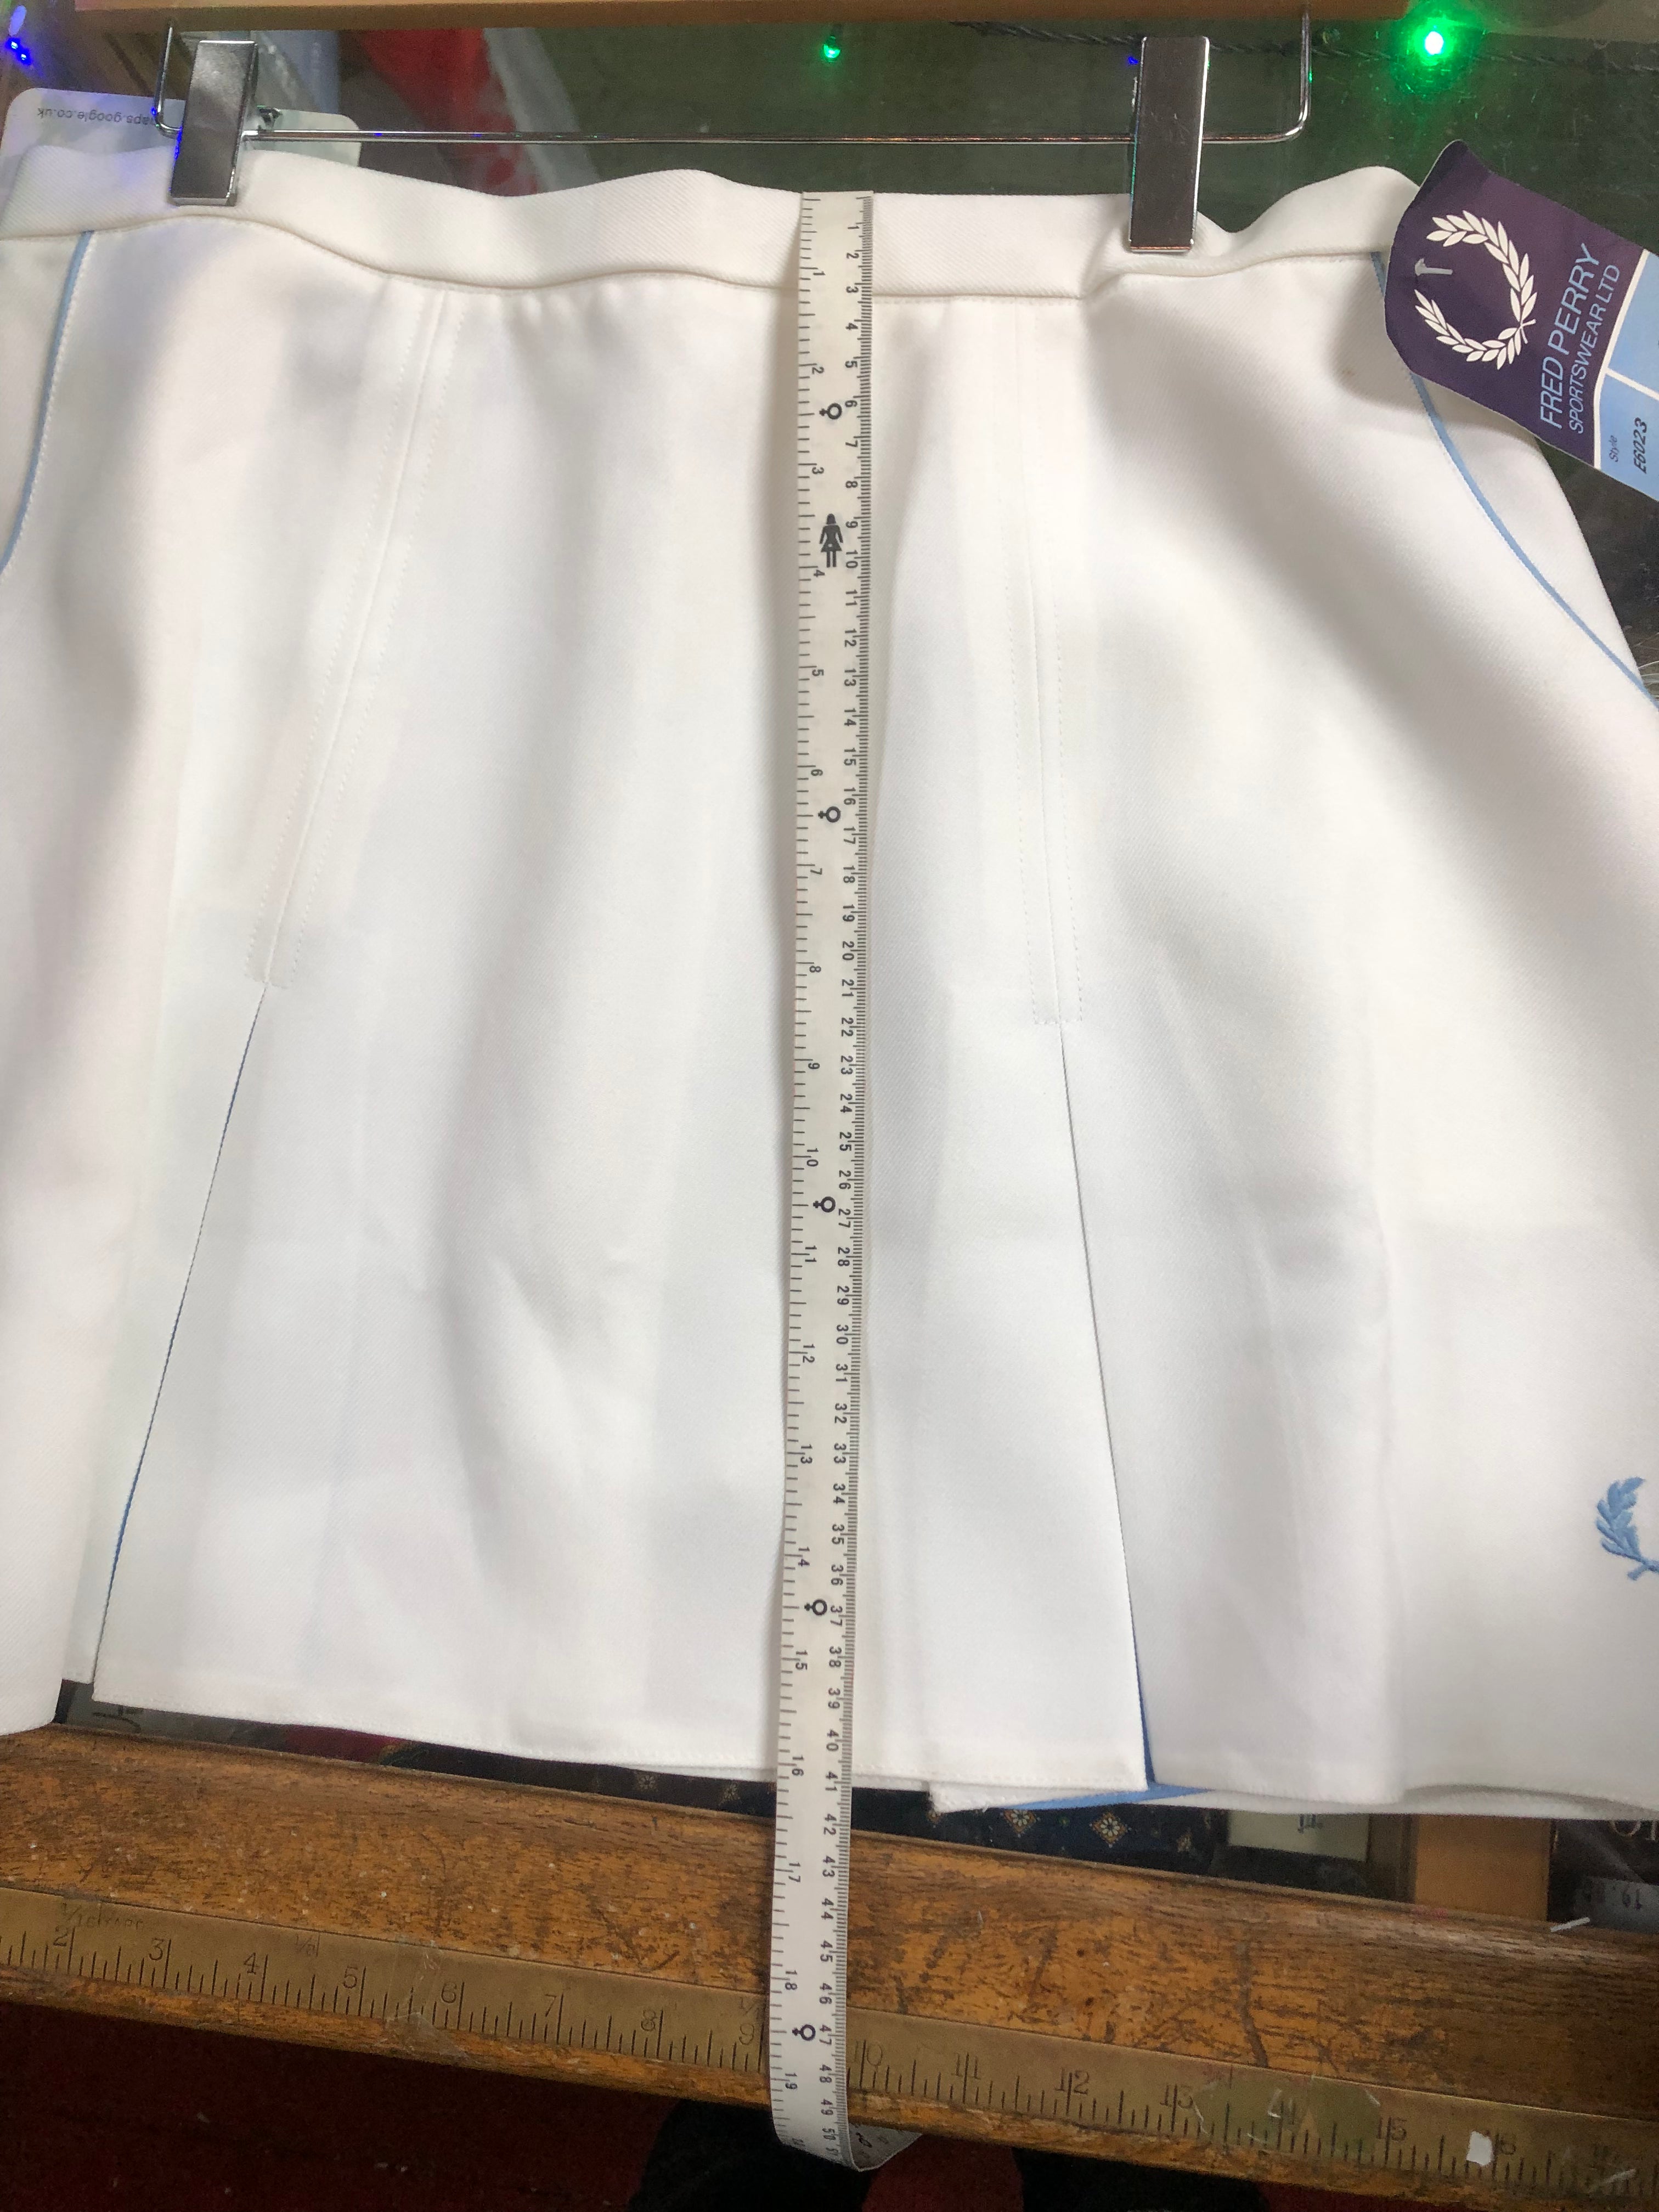 Fred Perry Tennis Skirt